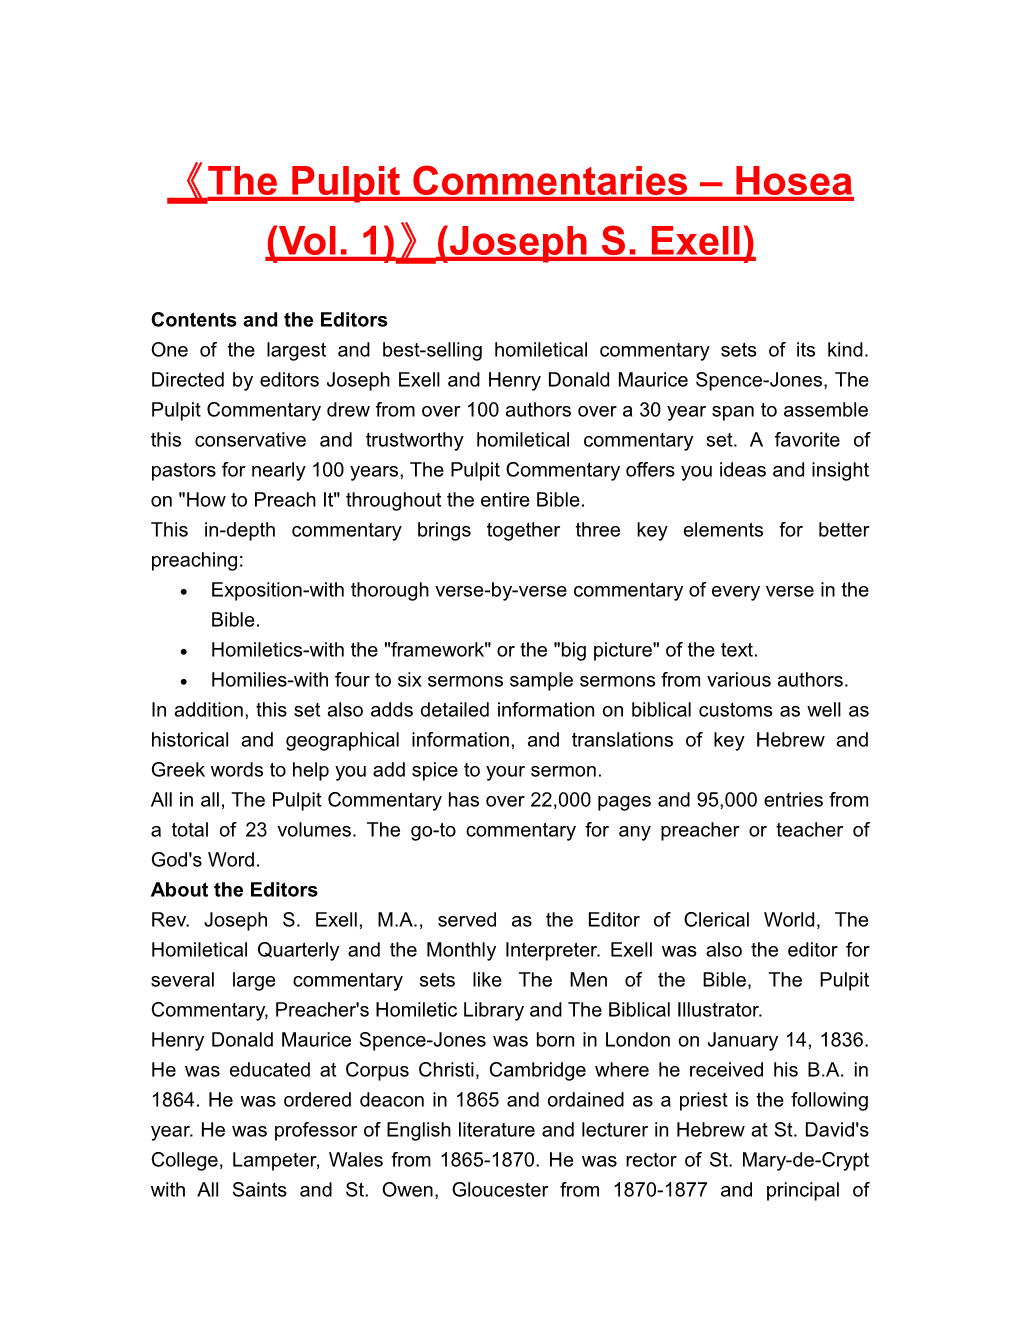 The Pulpit Commentaries Hosea (Vol. 1) (Joseph S. Exell)